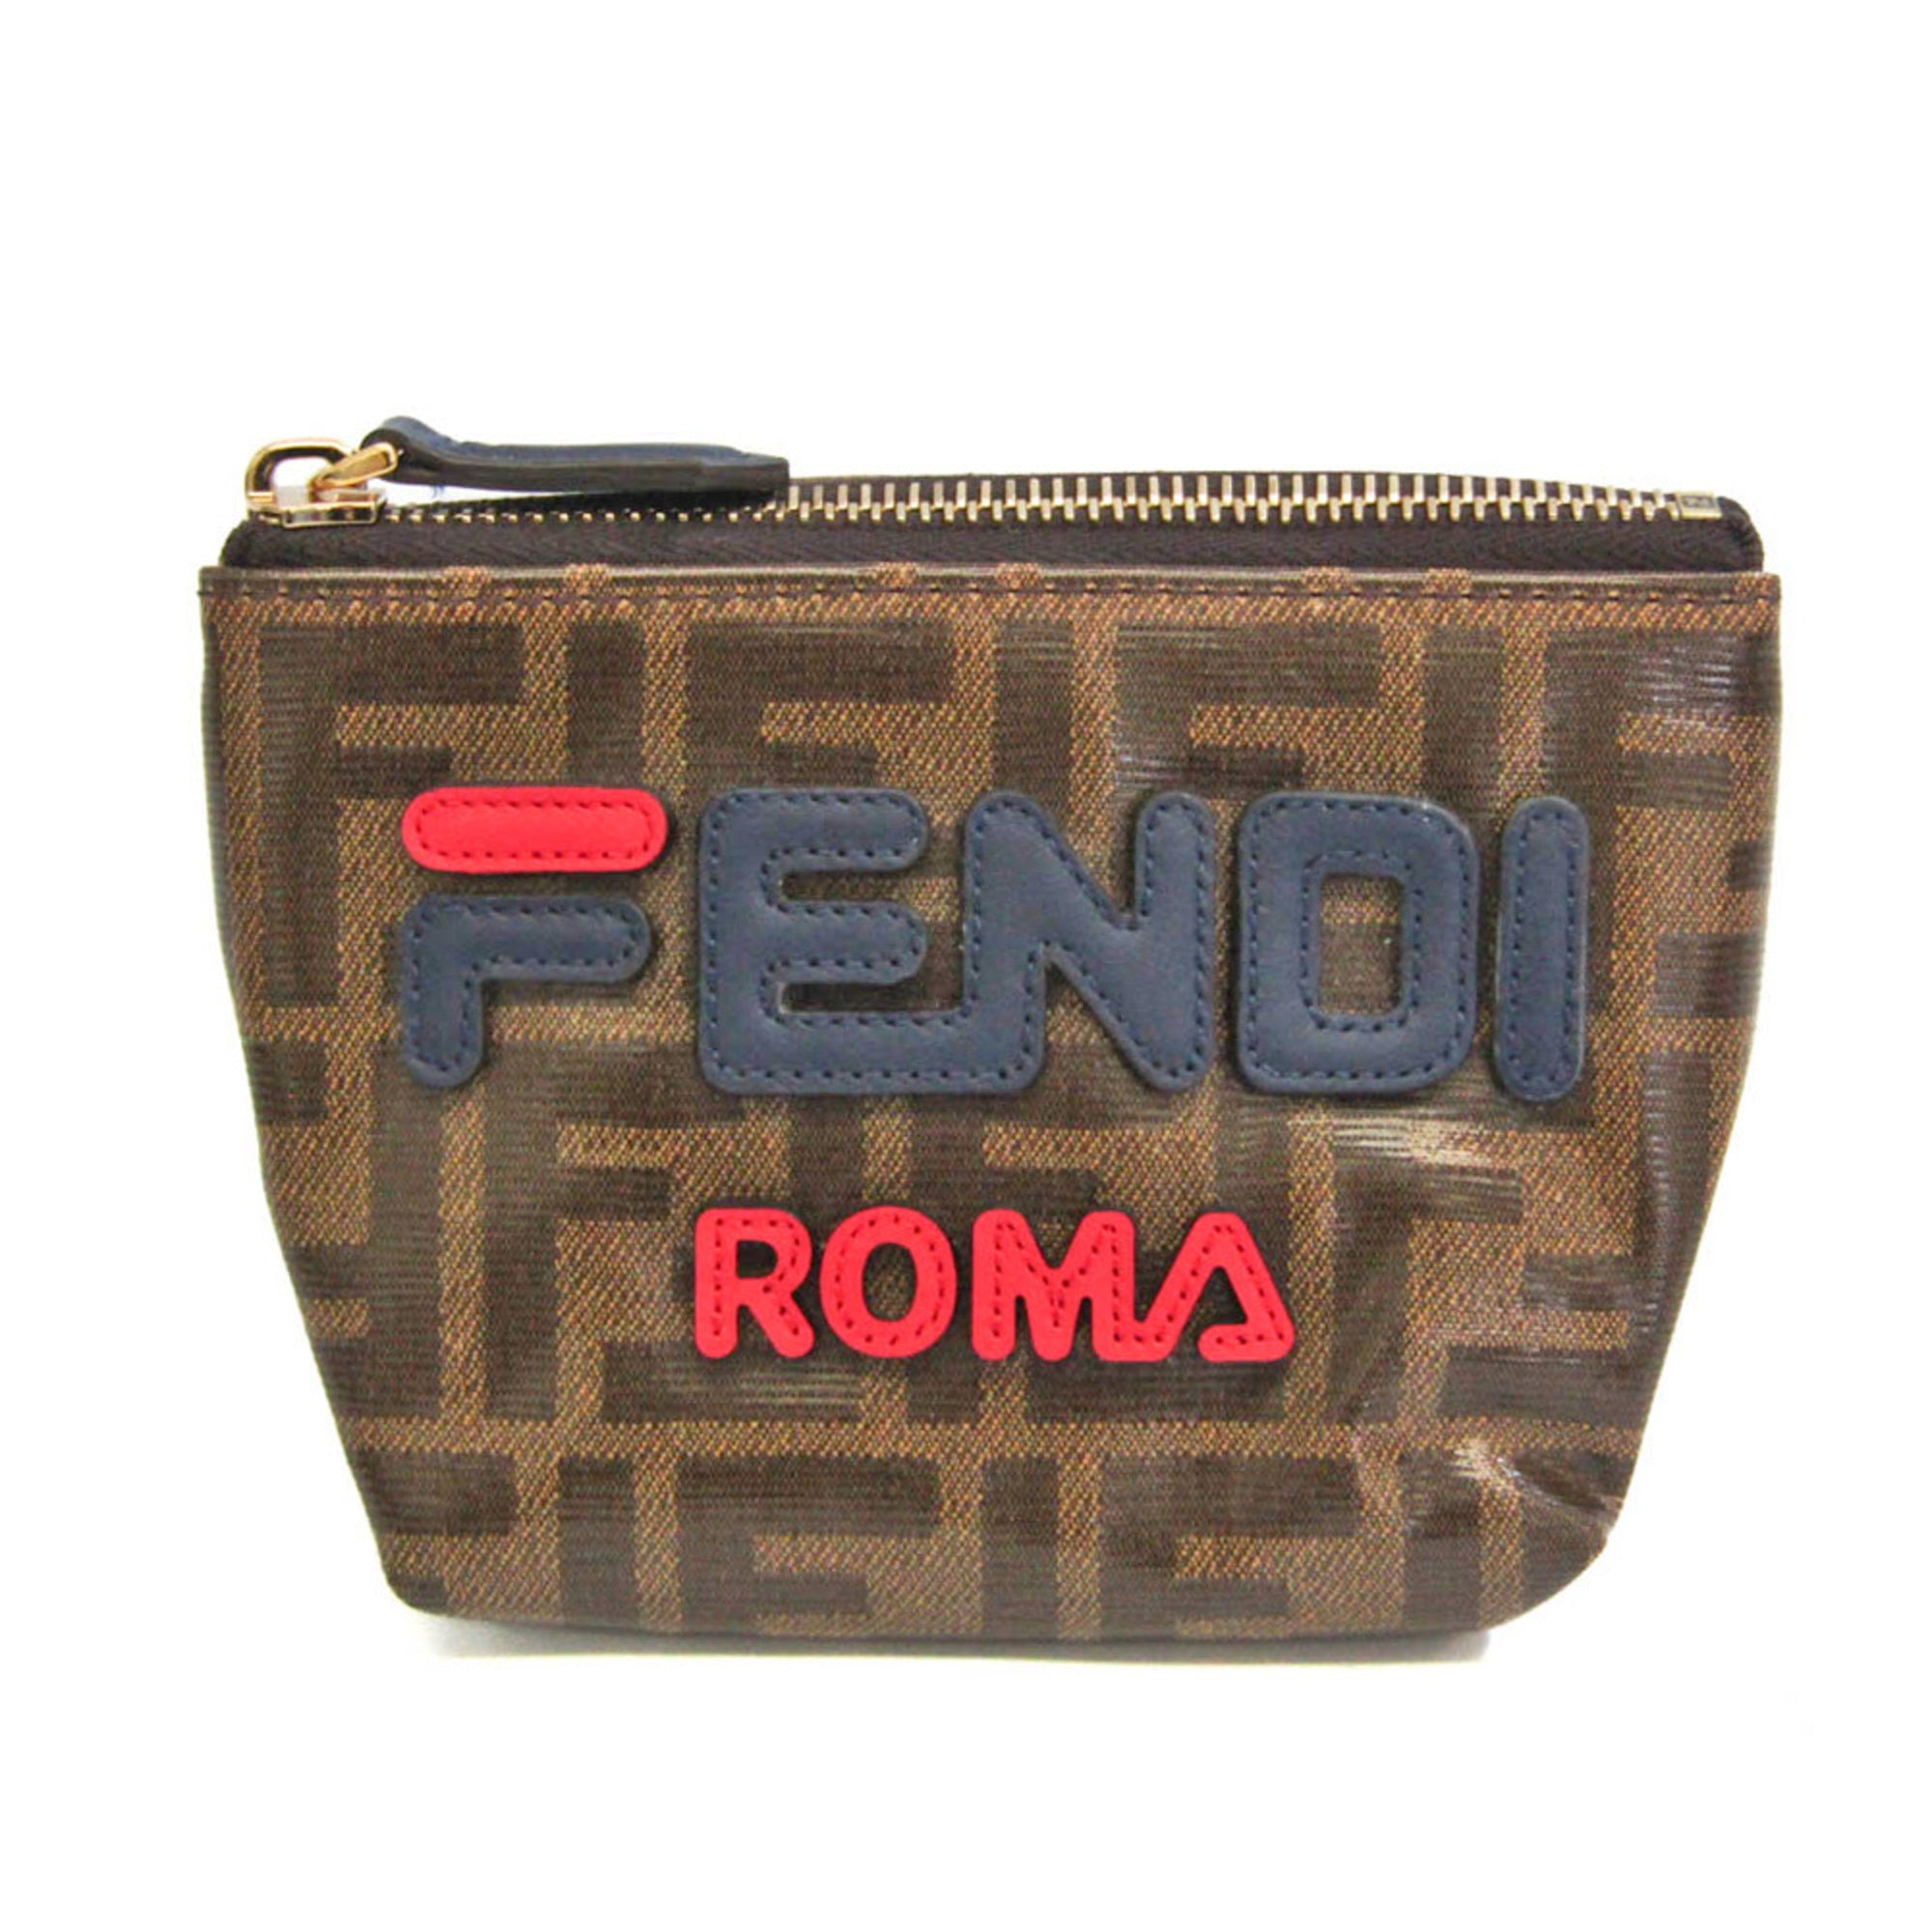 Fendi Zucca FILA Collaboration 7N0097 Women's Leather,Coated Canvas Pouch Brown,Navy,Red Color-0